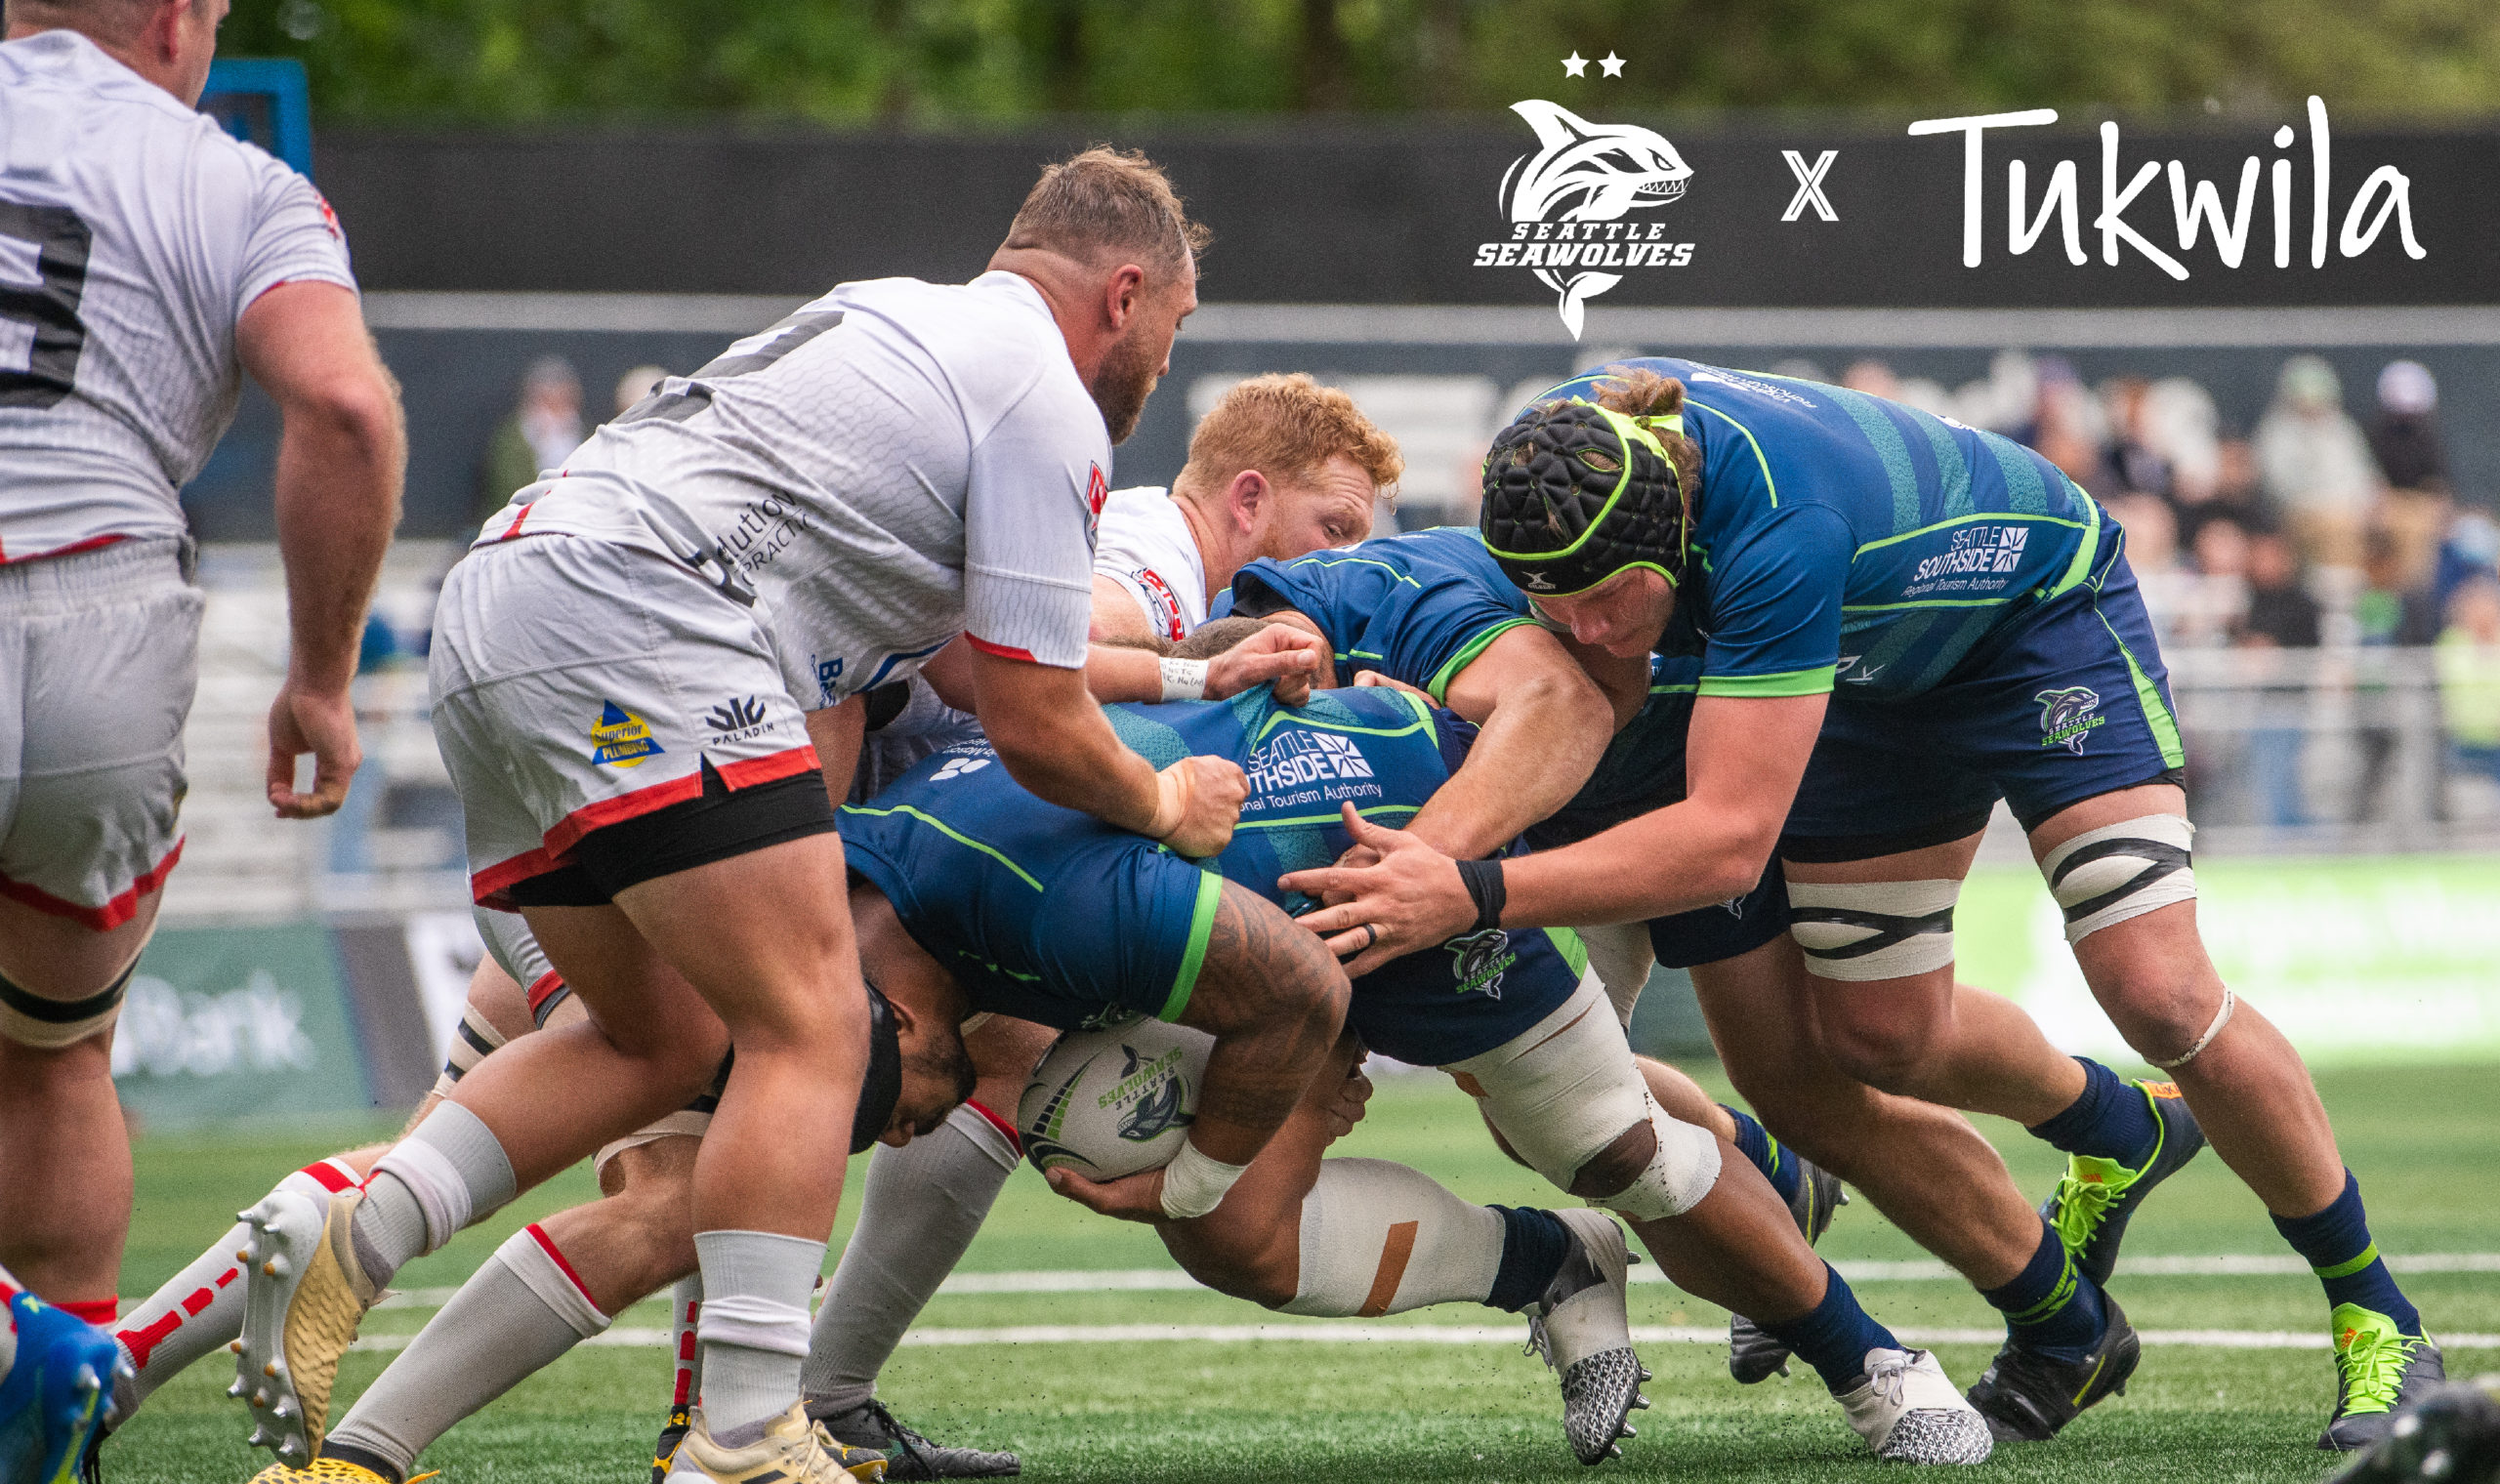 City of Tukwila Renews with Seattle Seawolves for 2021